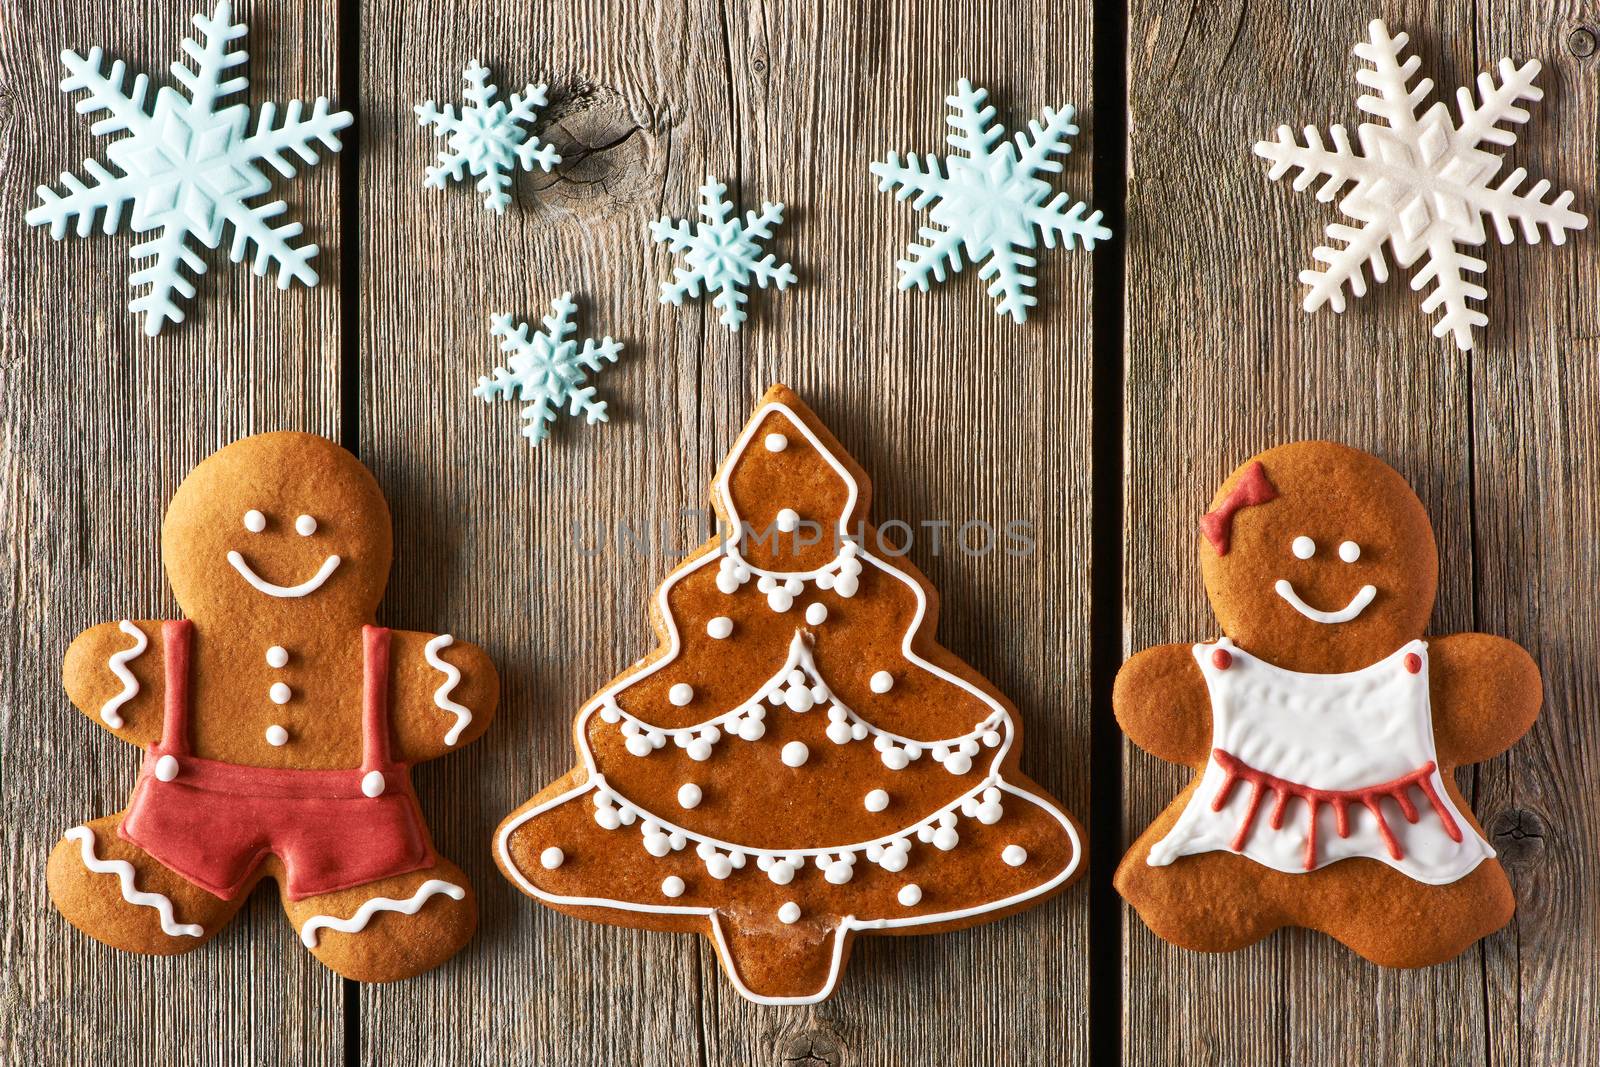 Christmas gingerbread couple and tree cookies by haveseen